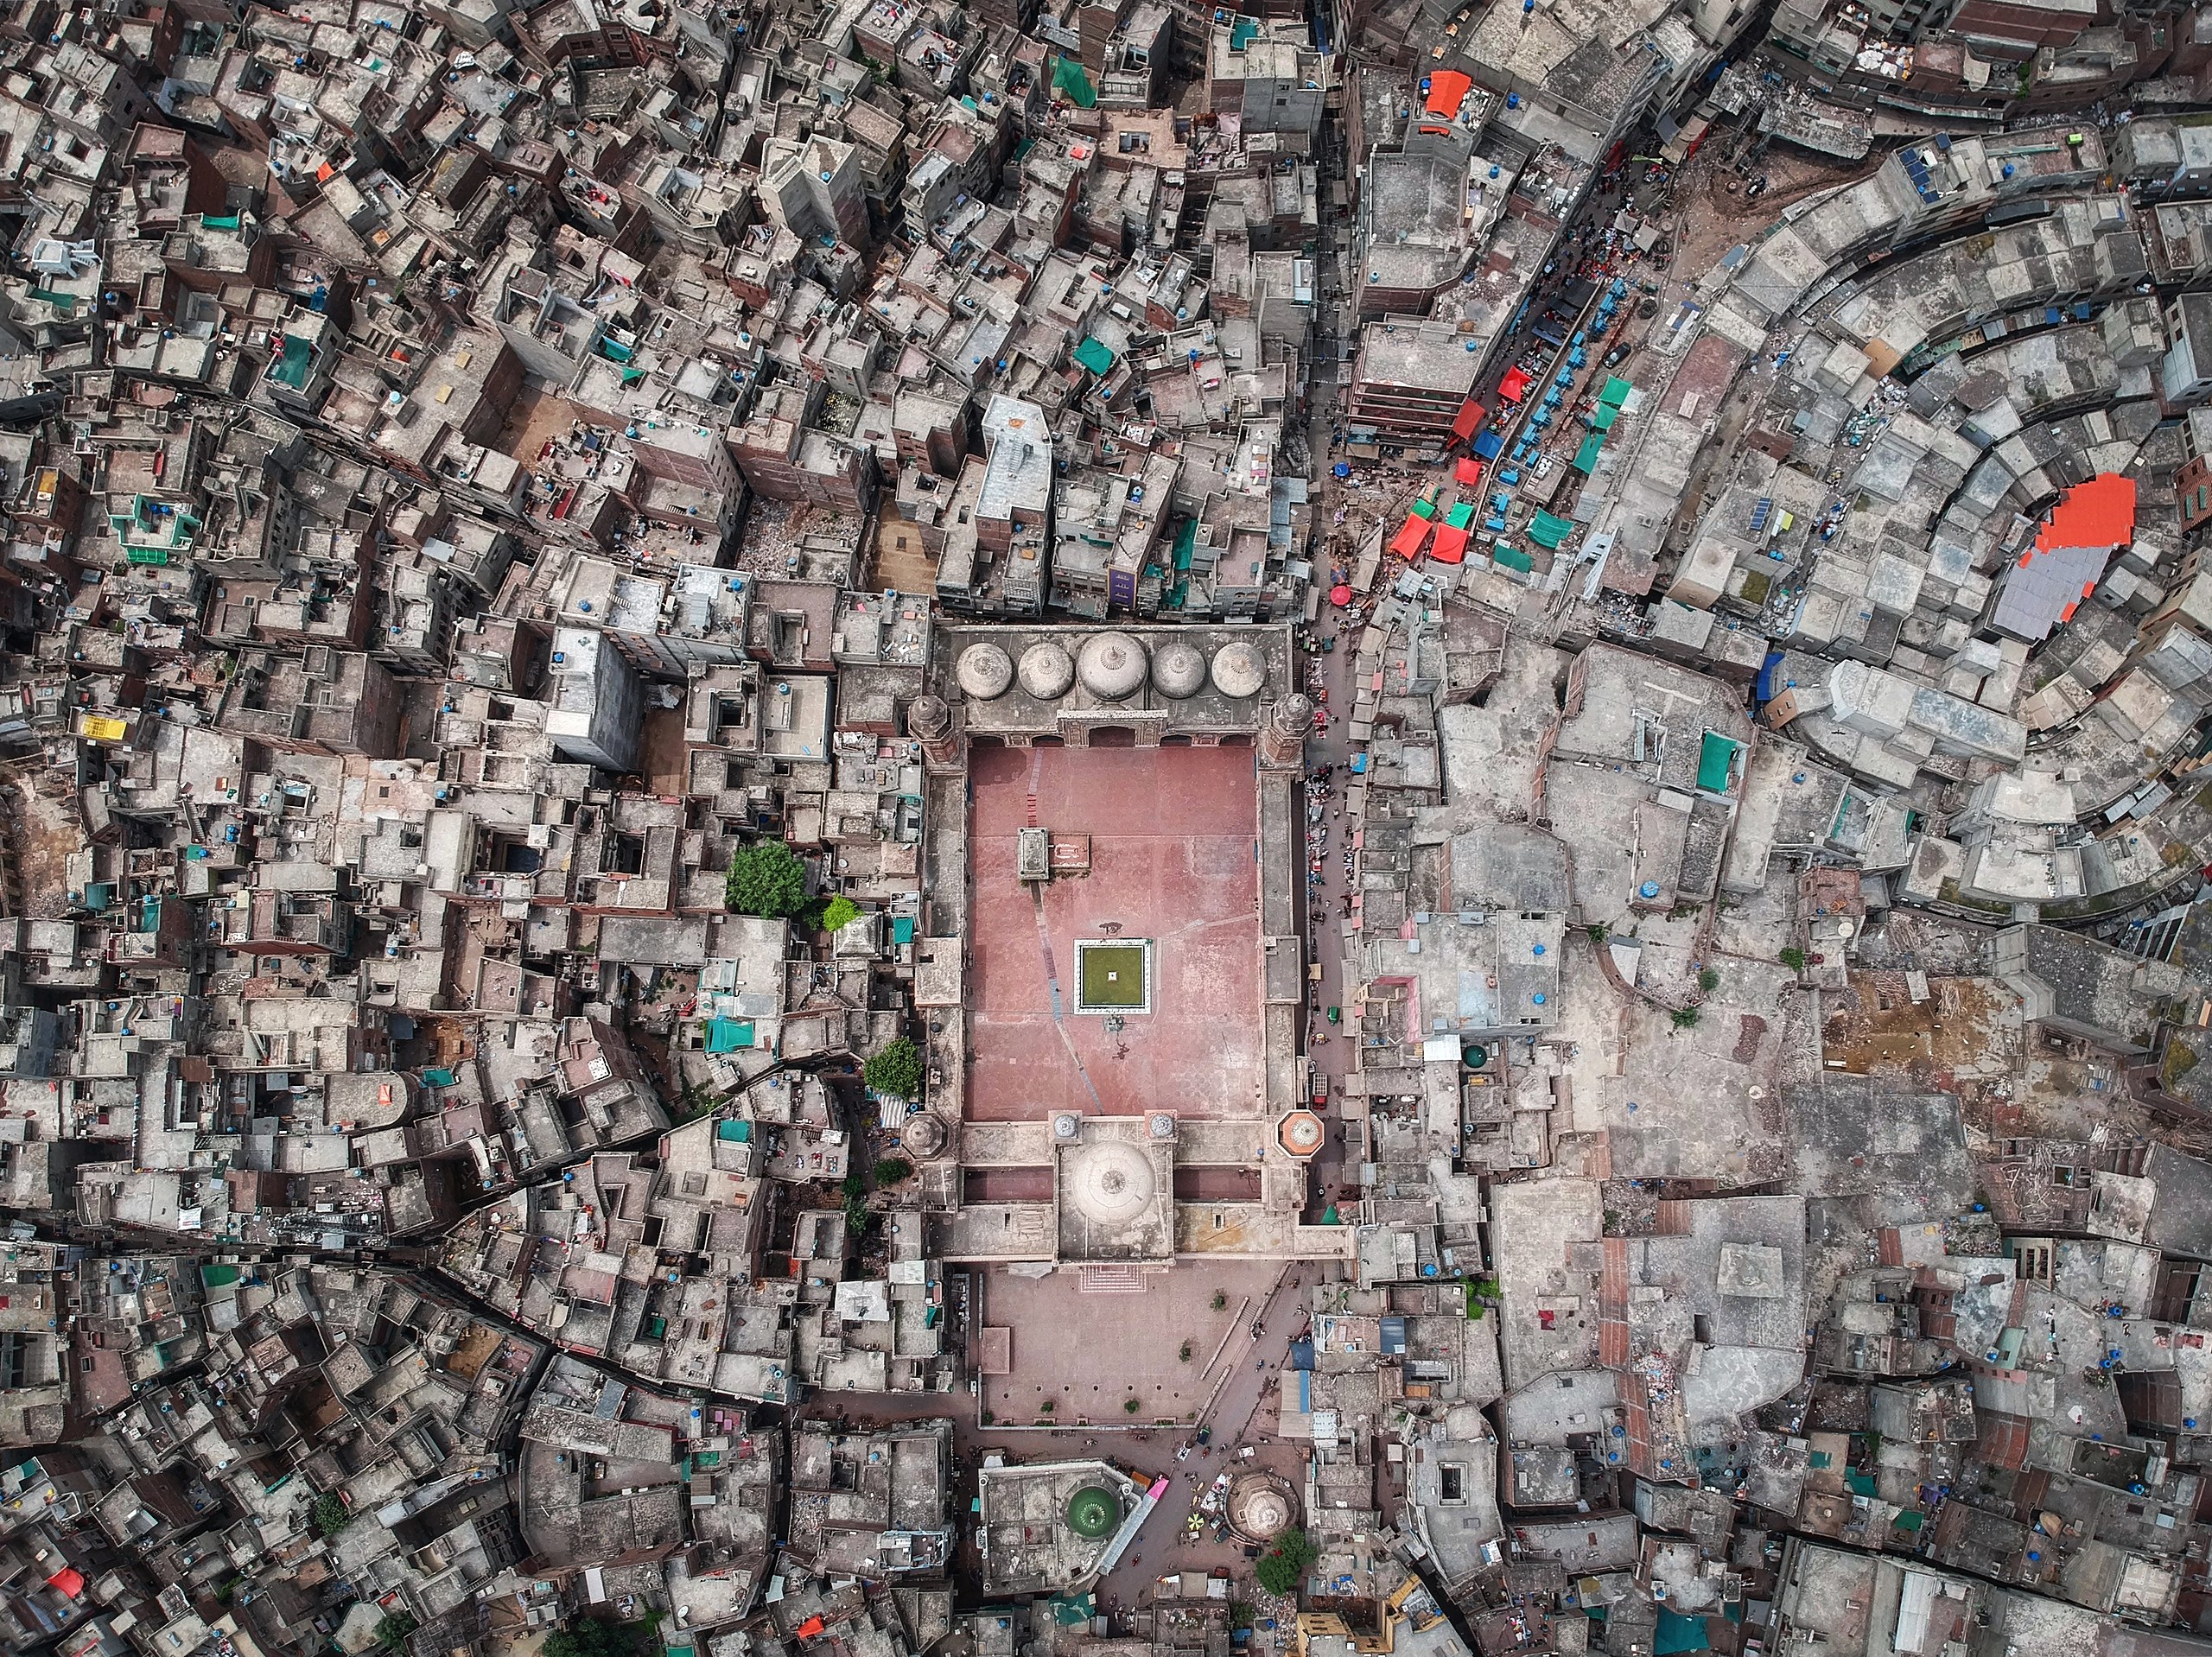 The urban sprawl of the Walled City of Lahore as viewed aerially today.